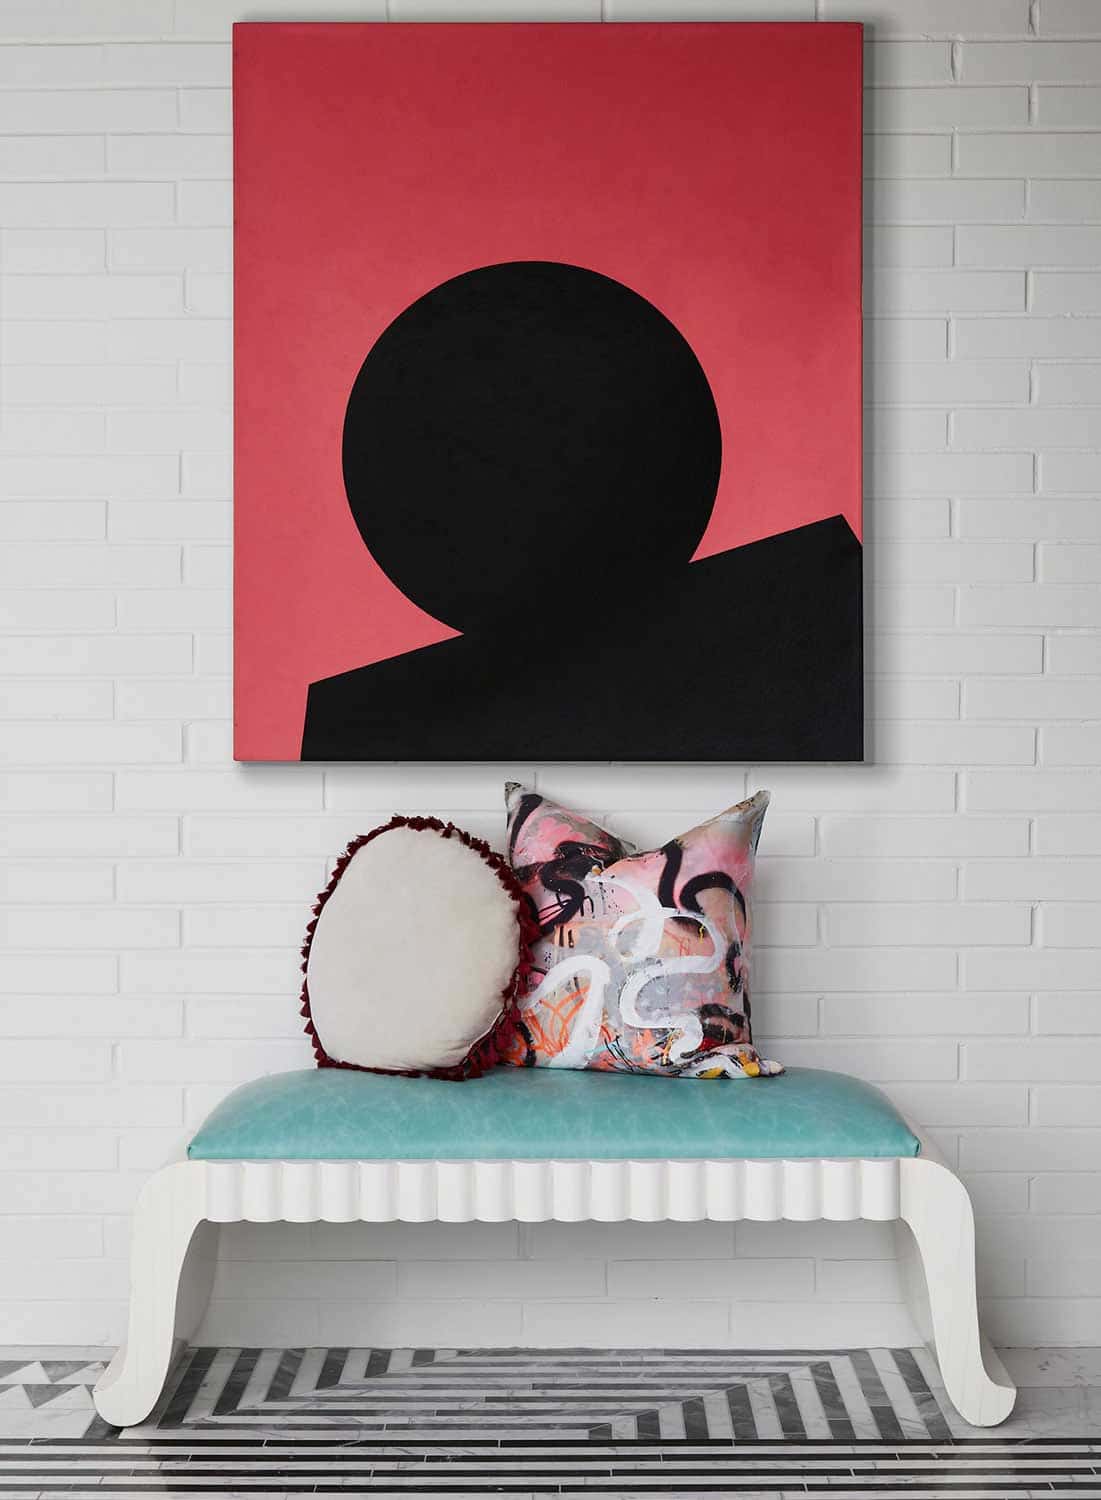 Modern 80s home decor with contemporary artwork and tile by Kelly Wearstler